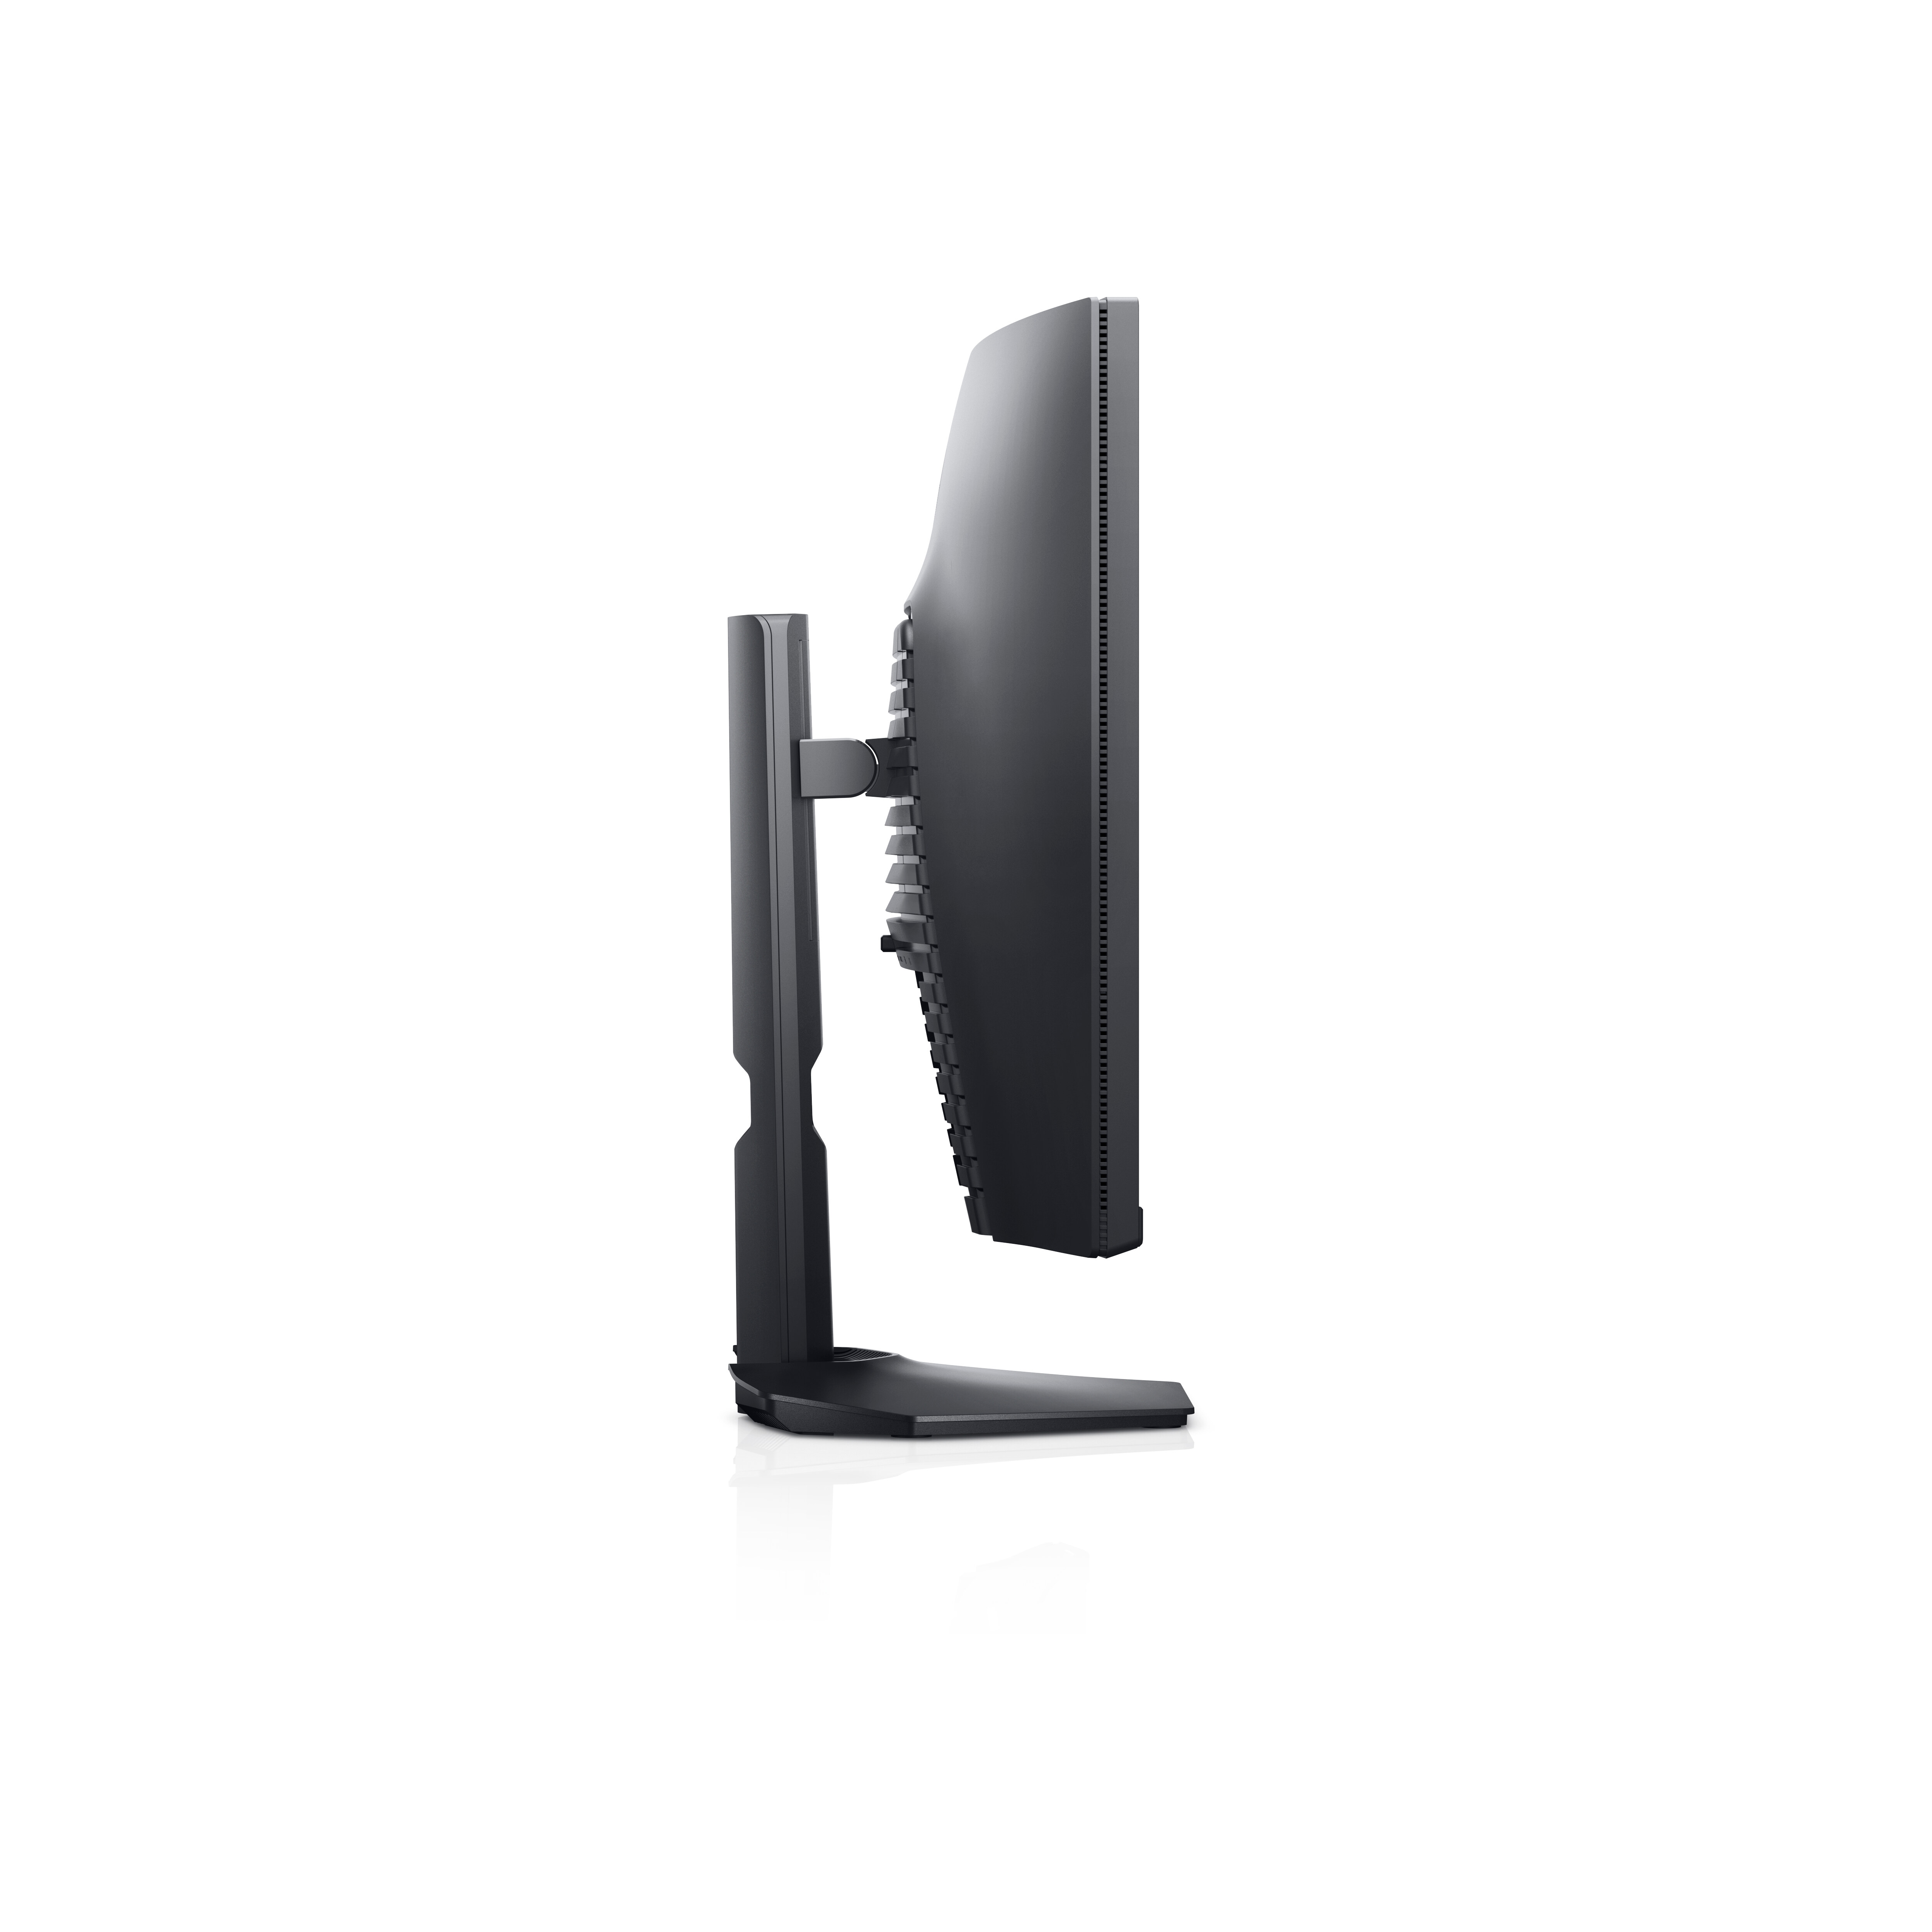 https://i.dell.com/is/image/DellContent//content/dam/ss2/product-images/dell-client-products/peripherals/monitors/s-series/s2722dgm/media-gallery/s2722dgm_cfp_000p0rf090_bk.psd?fmt=pjpg&pscan=auto&scl=1&wid=5000&hei=5000&qlt=100,1&resMode=sharp2&size=5000,5000&chrss=full&imwidth=5000